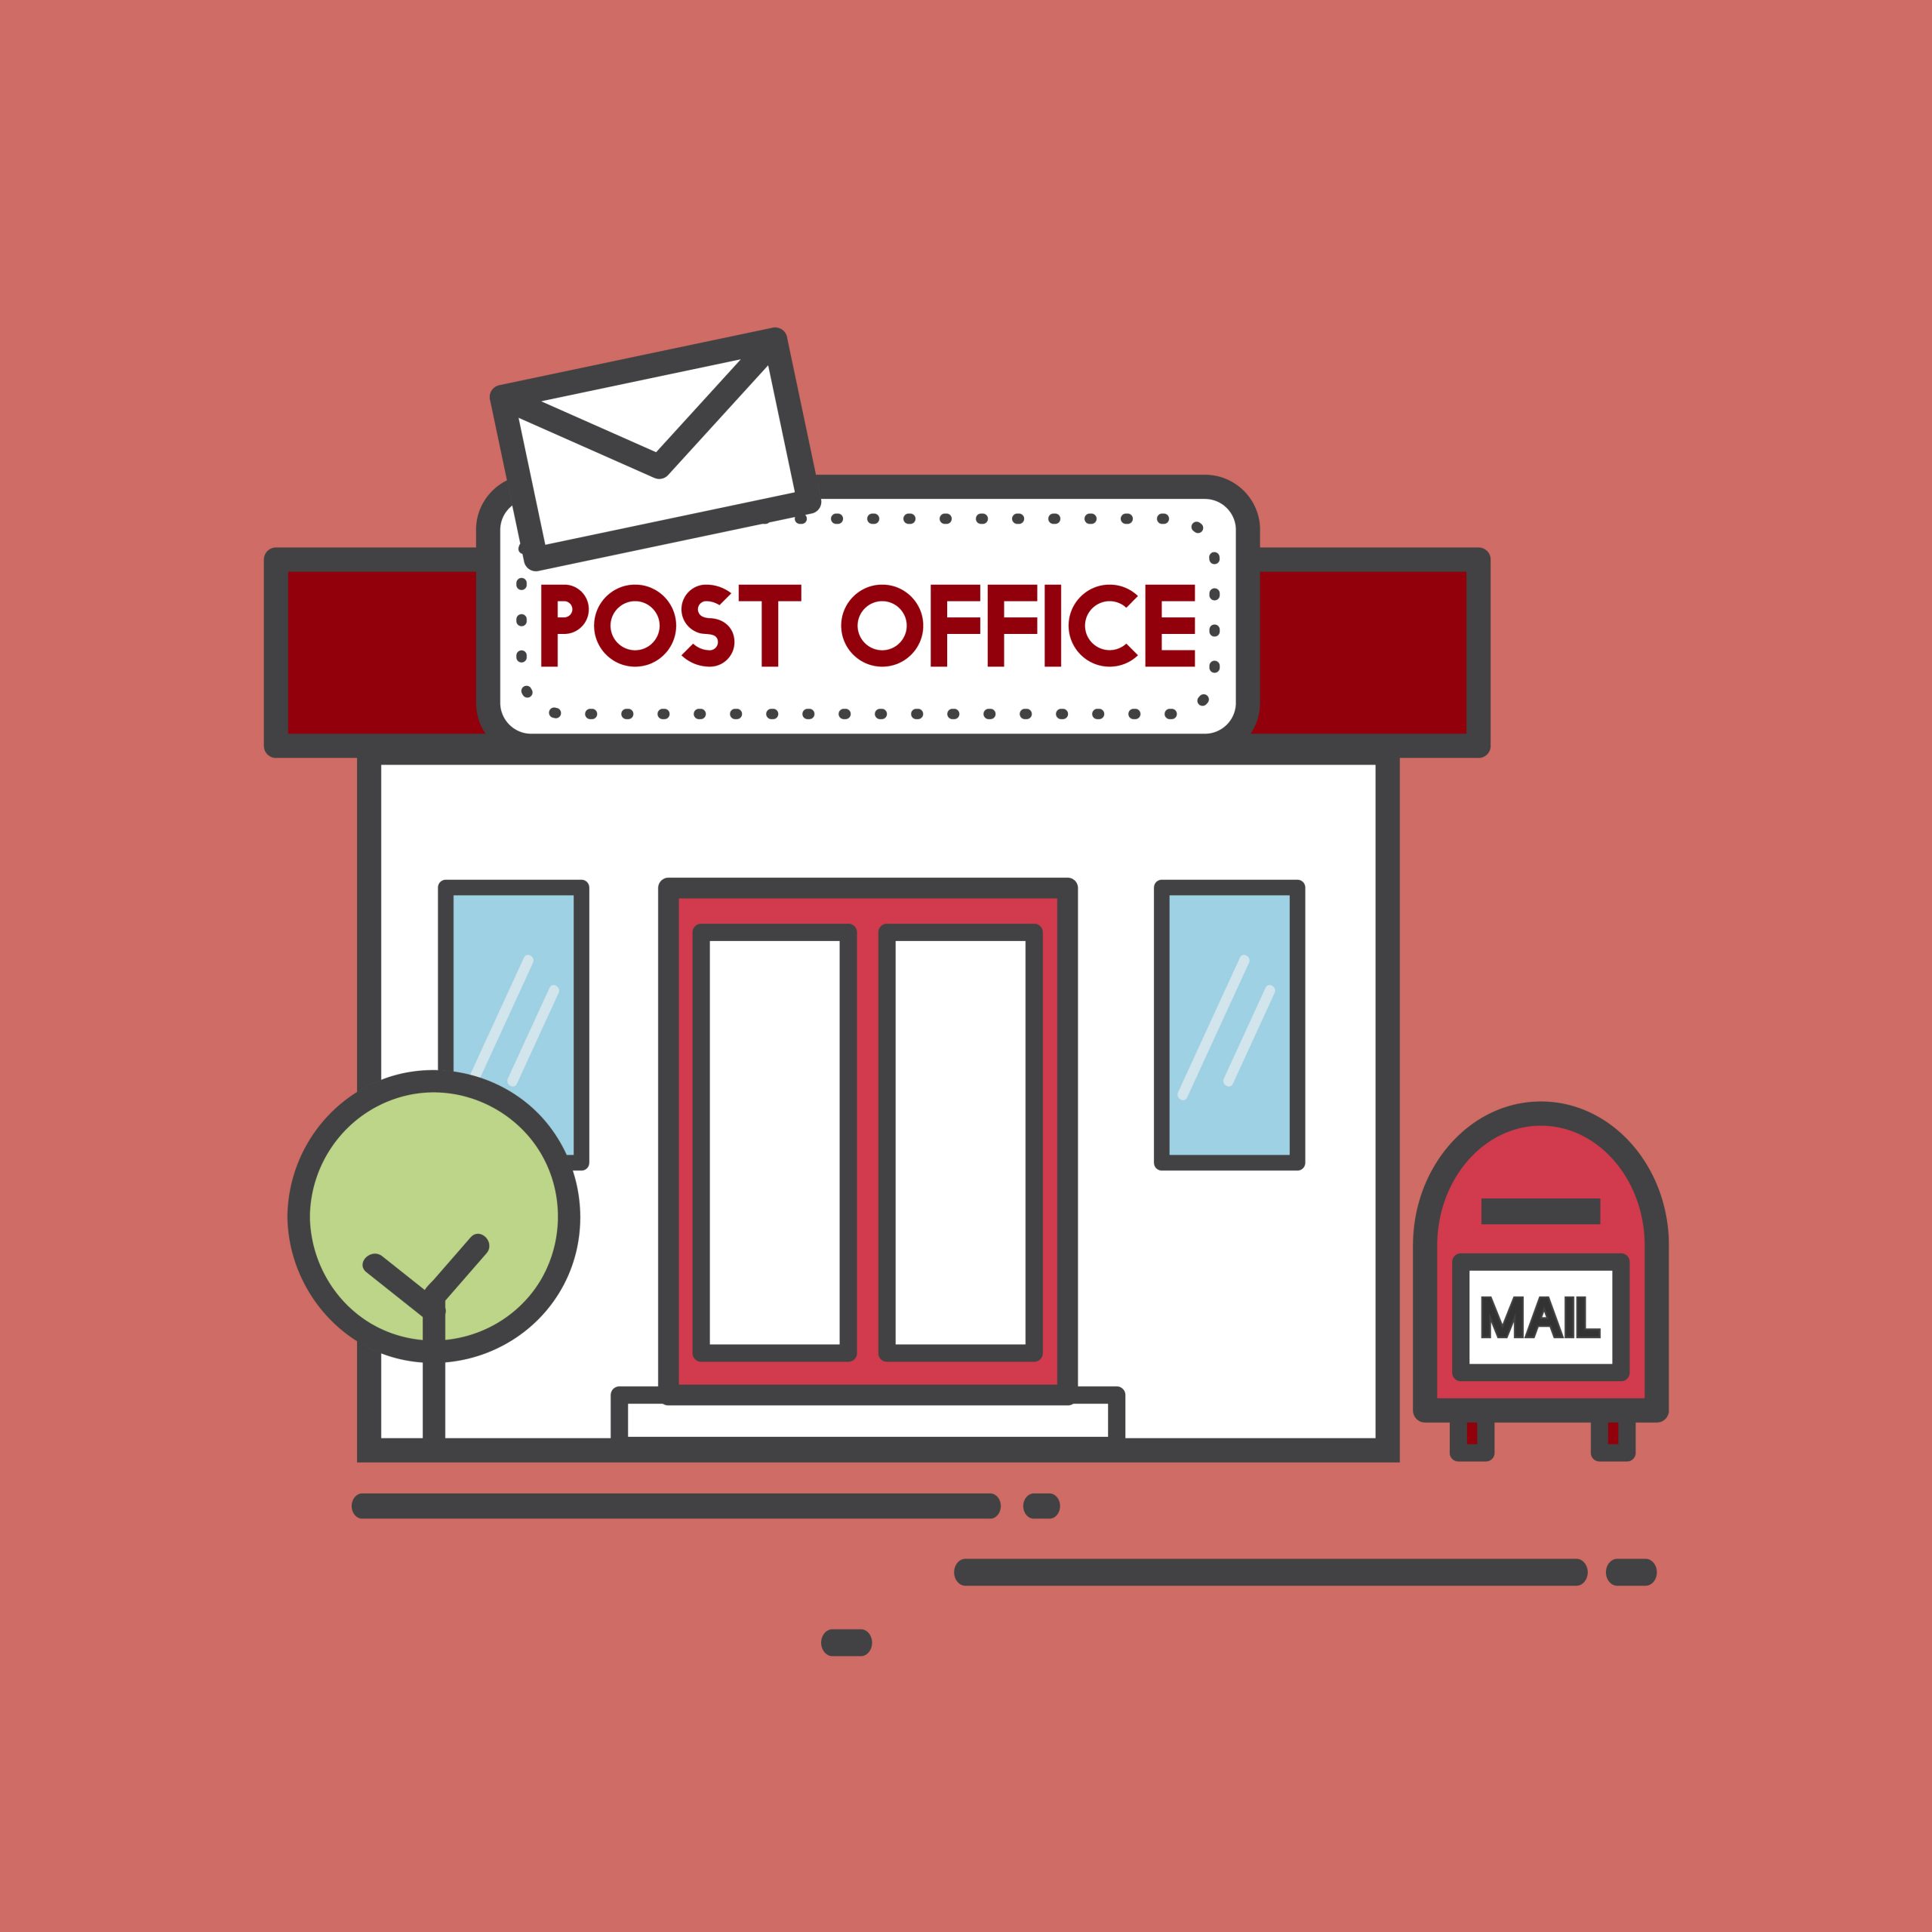 The bank is the post office